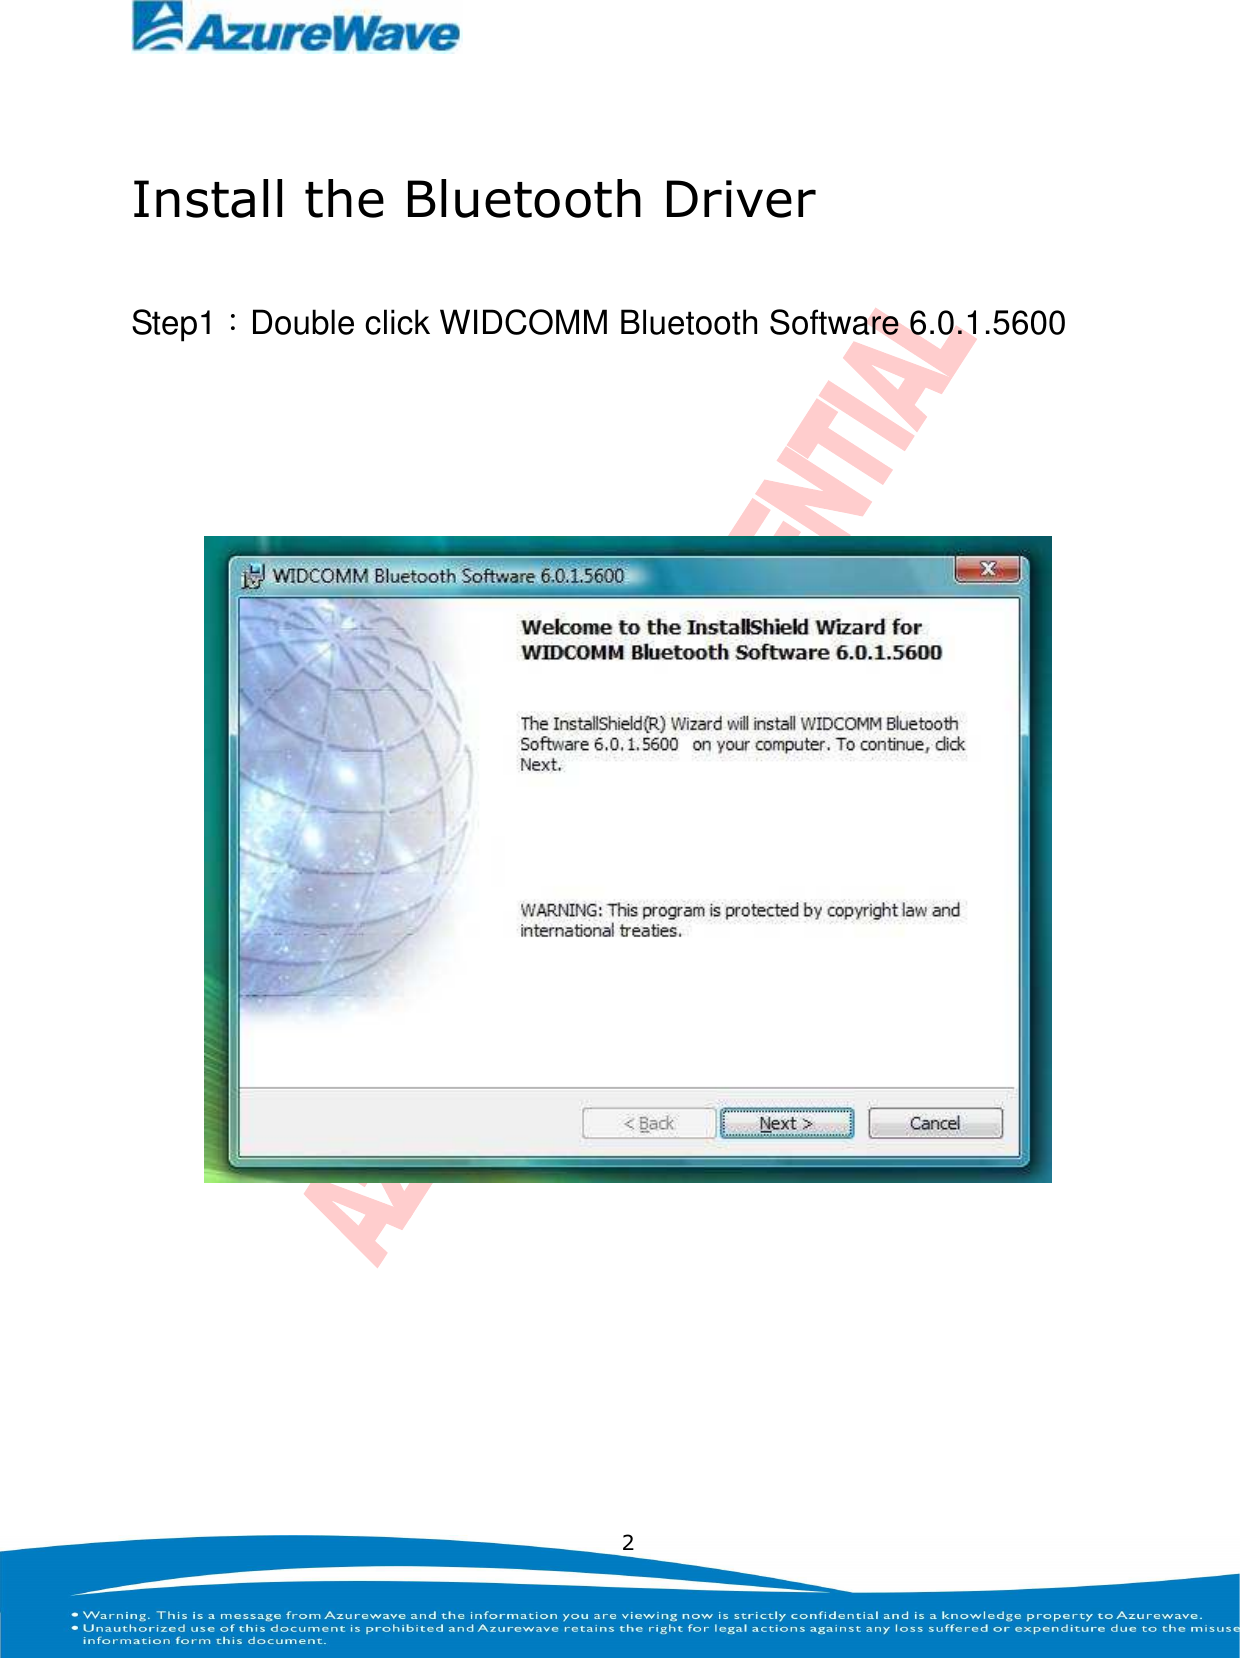    2  Install the Bluetooth Driver Step1：Double click WIDCOMM Bluetooth Software 6.0.1.5600     